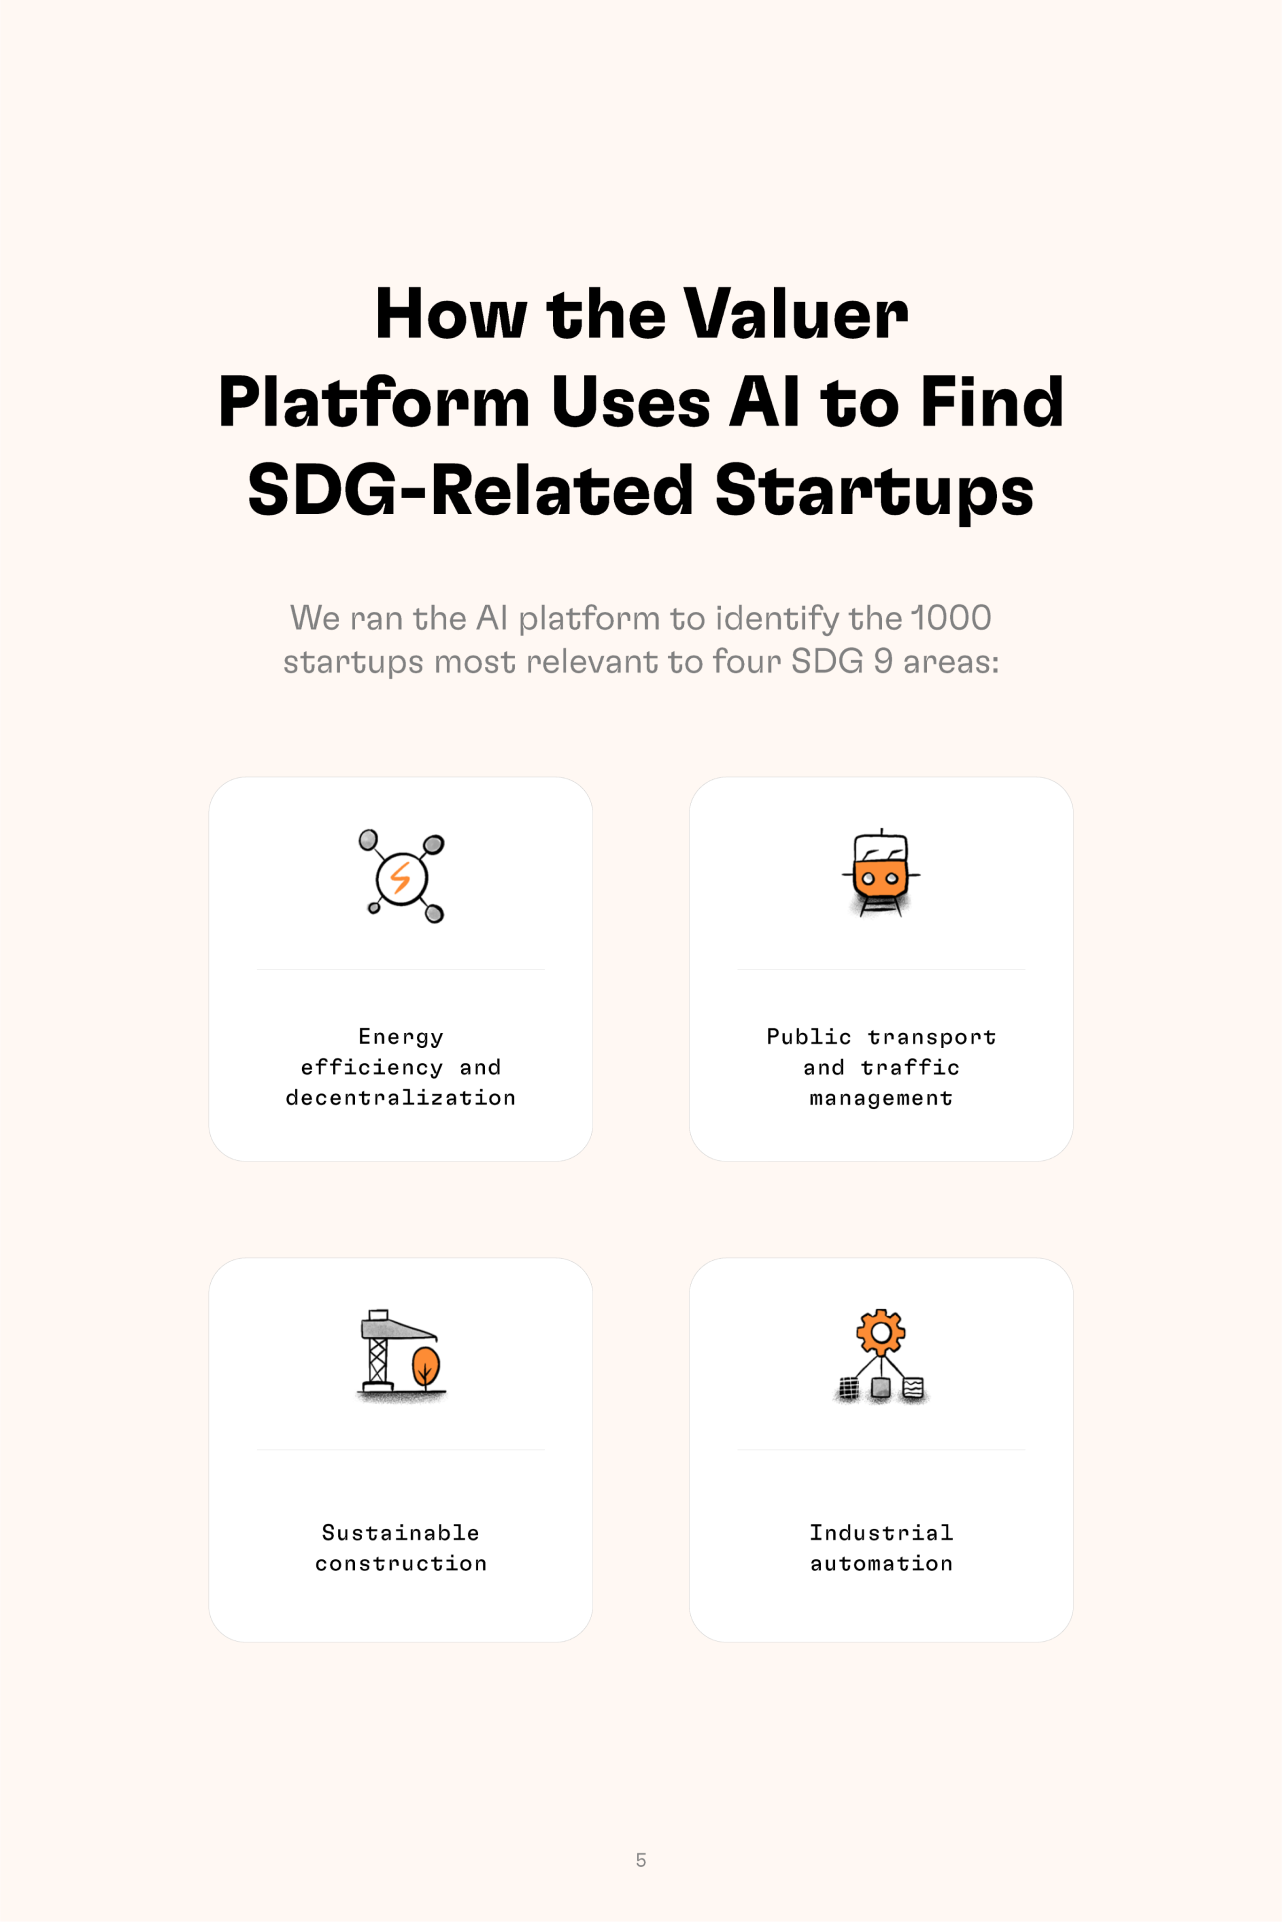 Discover SDG related startups with Valuer